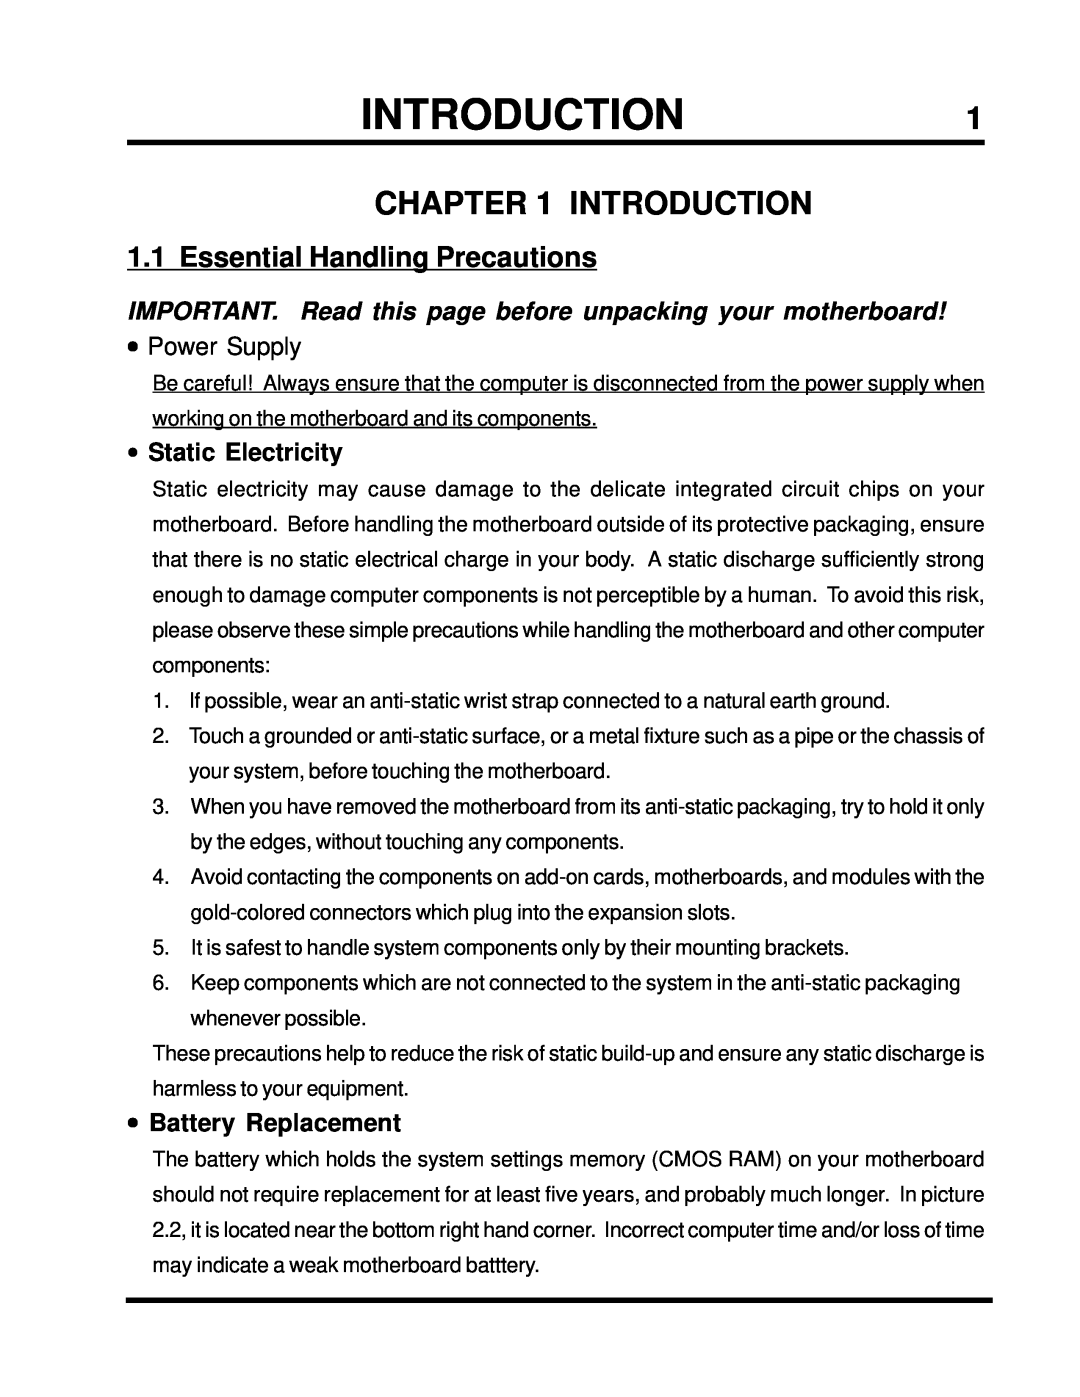 Intel TS-ASP3 user manual INTRODUCTION1, Introduction, Essential Handling Precautions, •Power Supply, •Static Electricity 